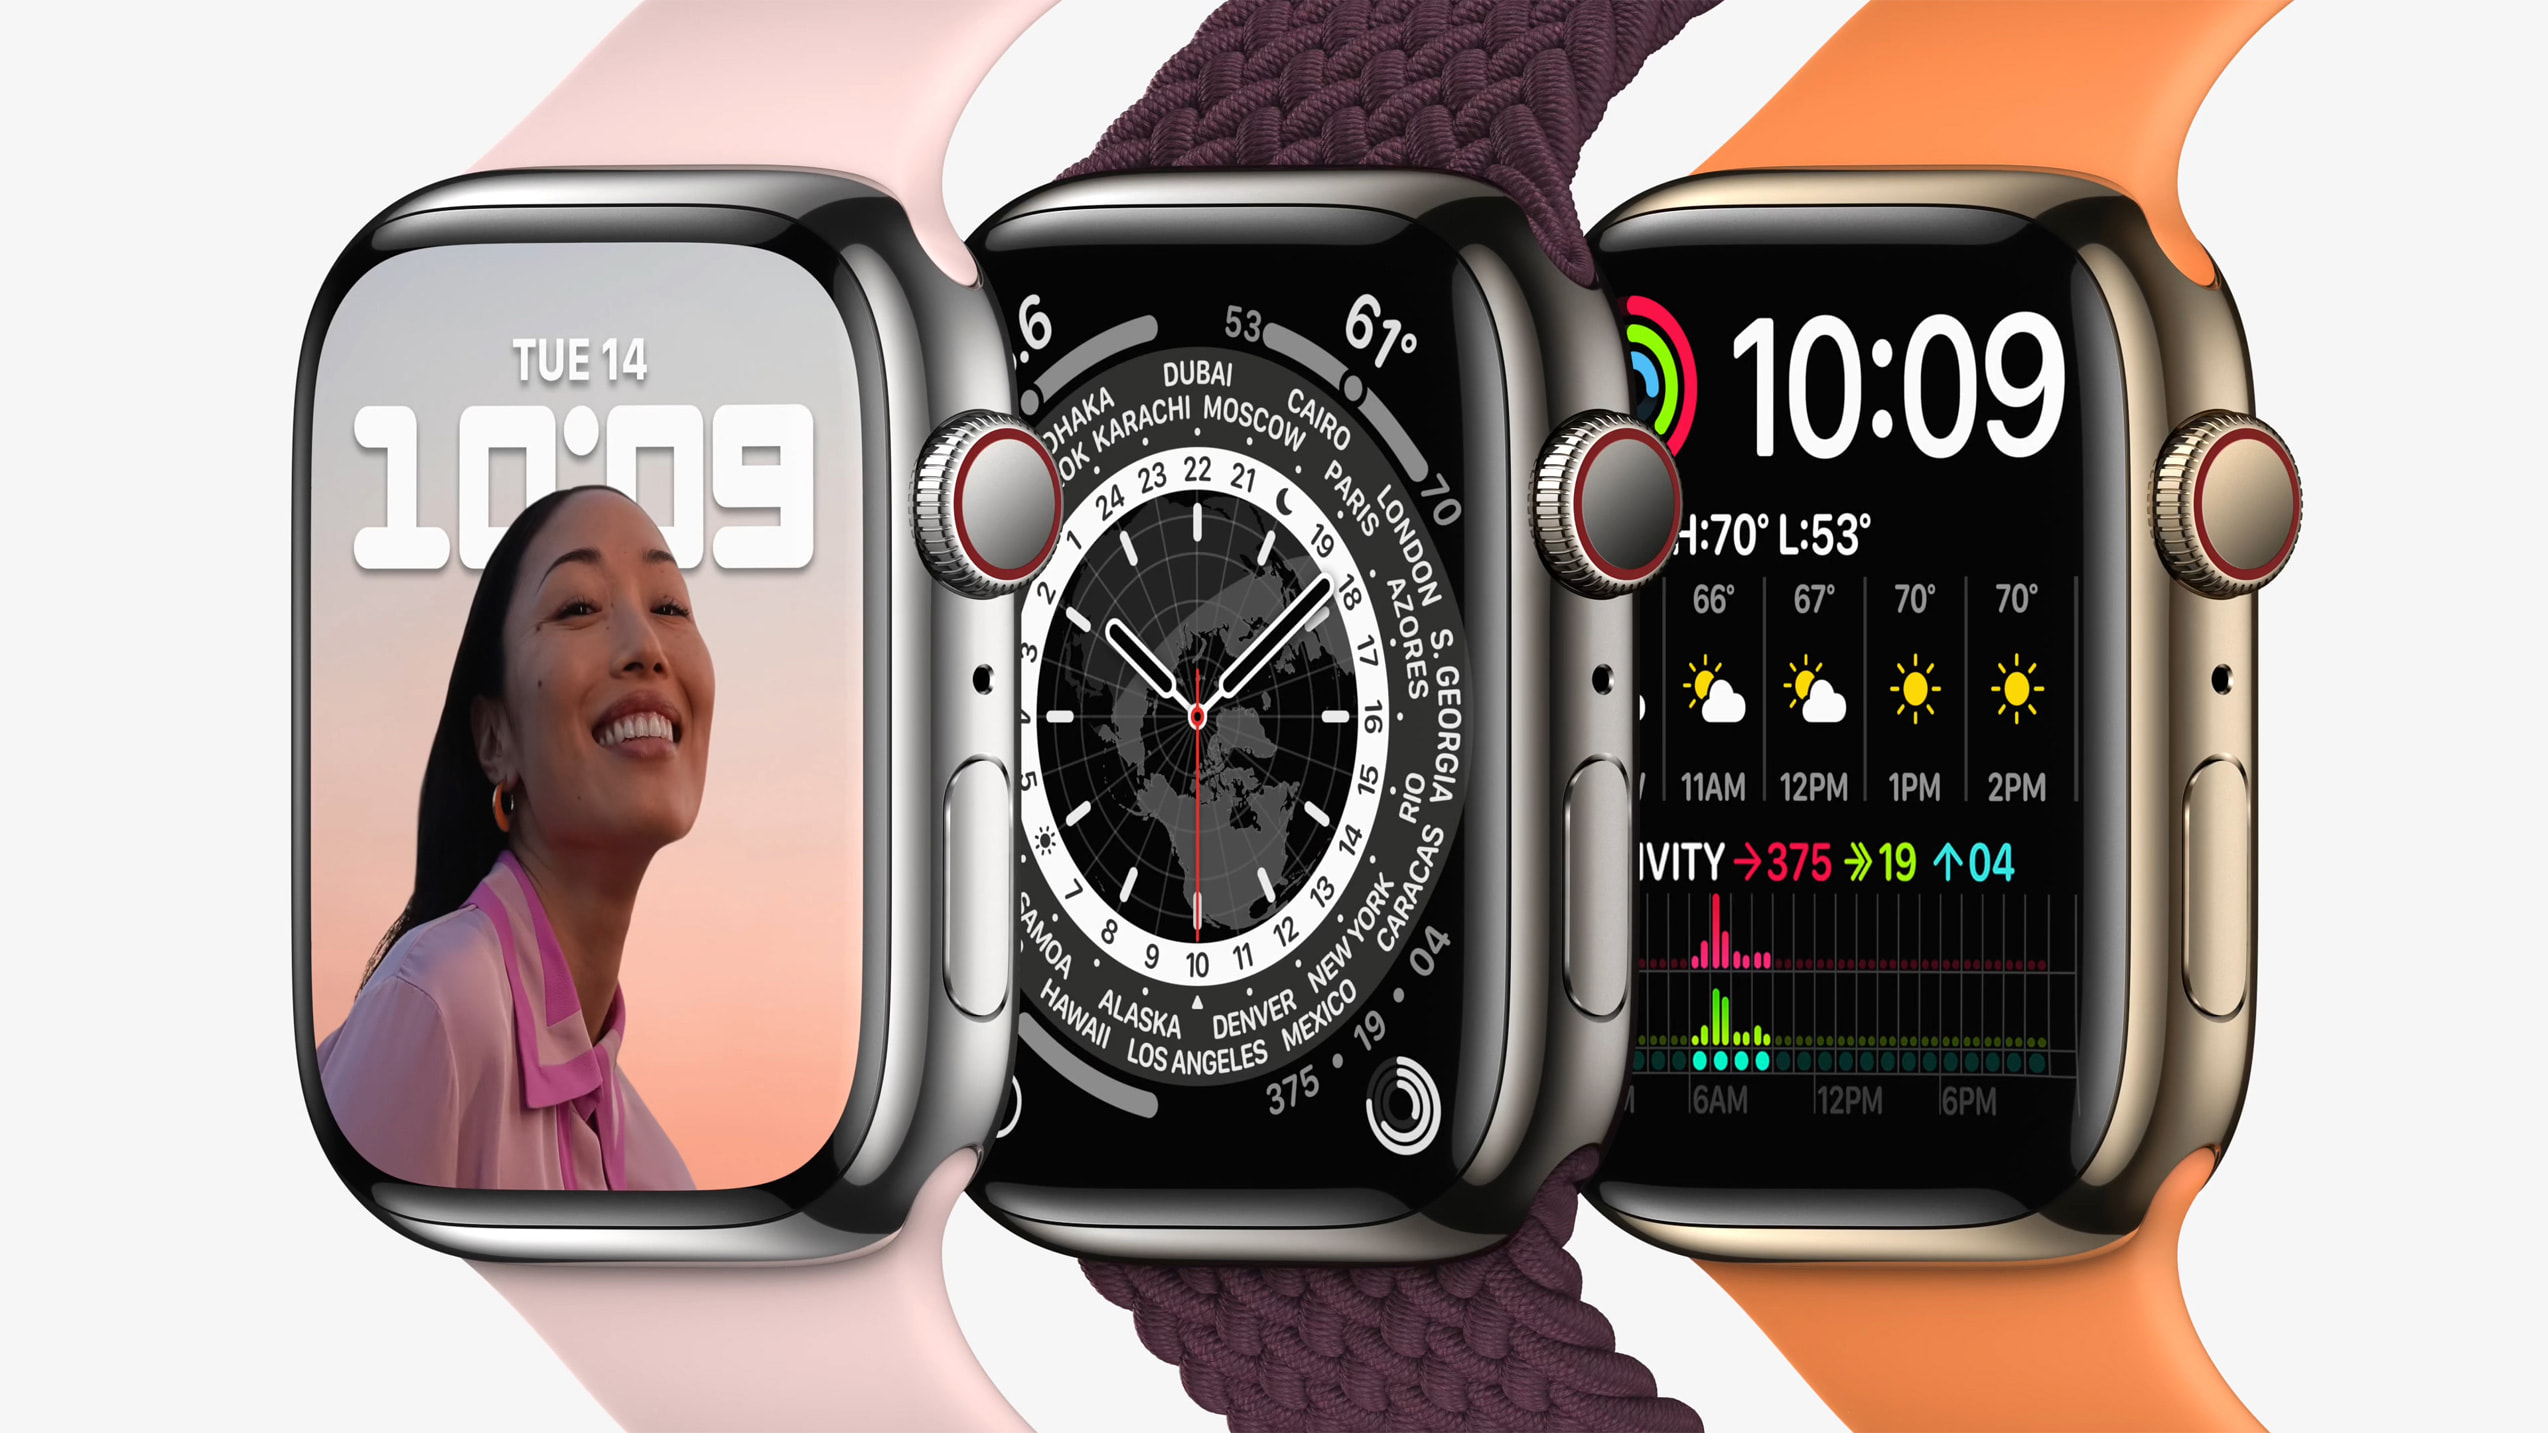 Bloomberg: Blood glucose measurement feature won't appear on Apple Watch until 3-7 years from now